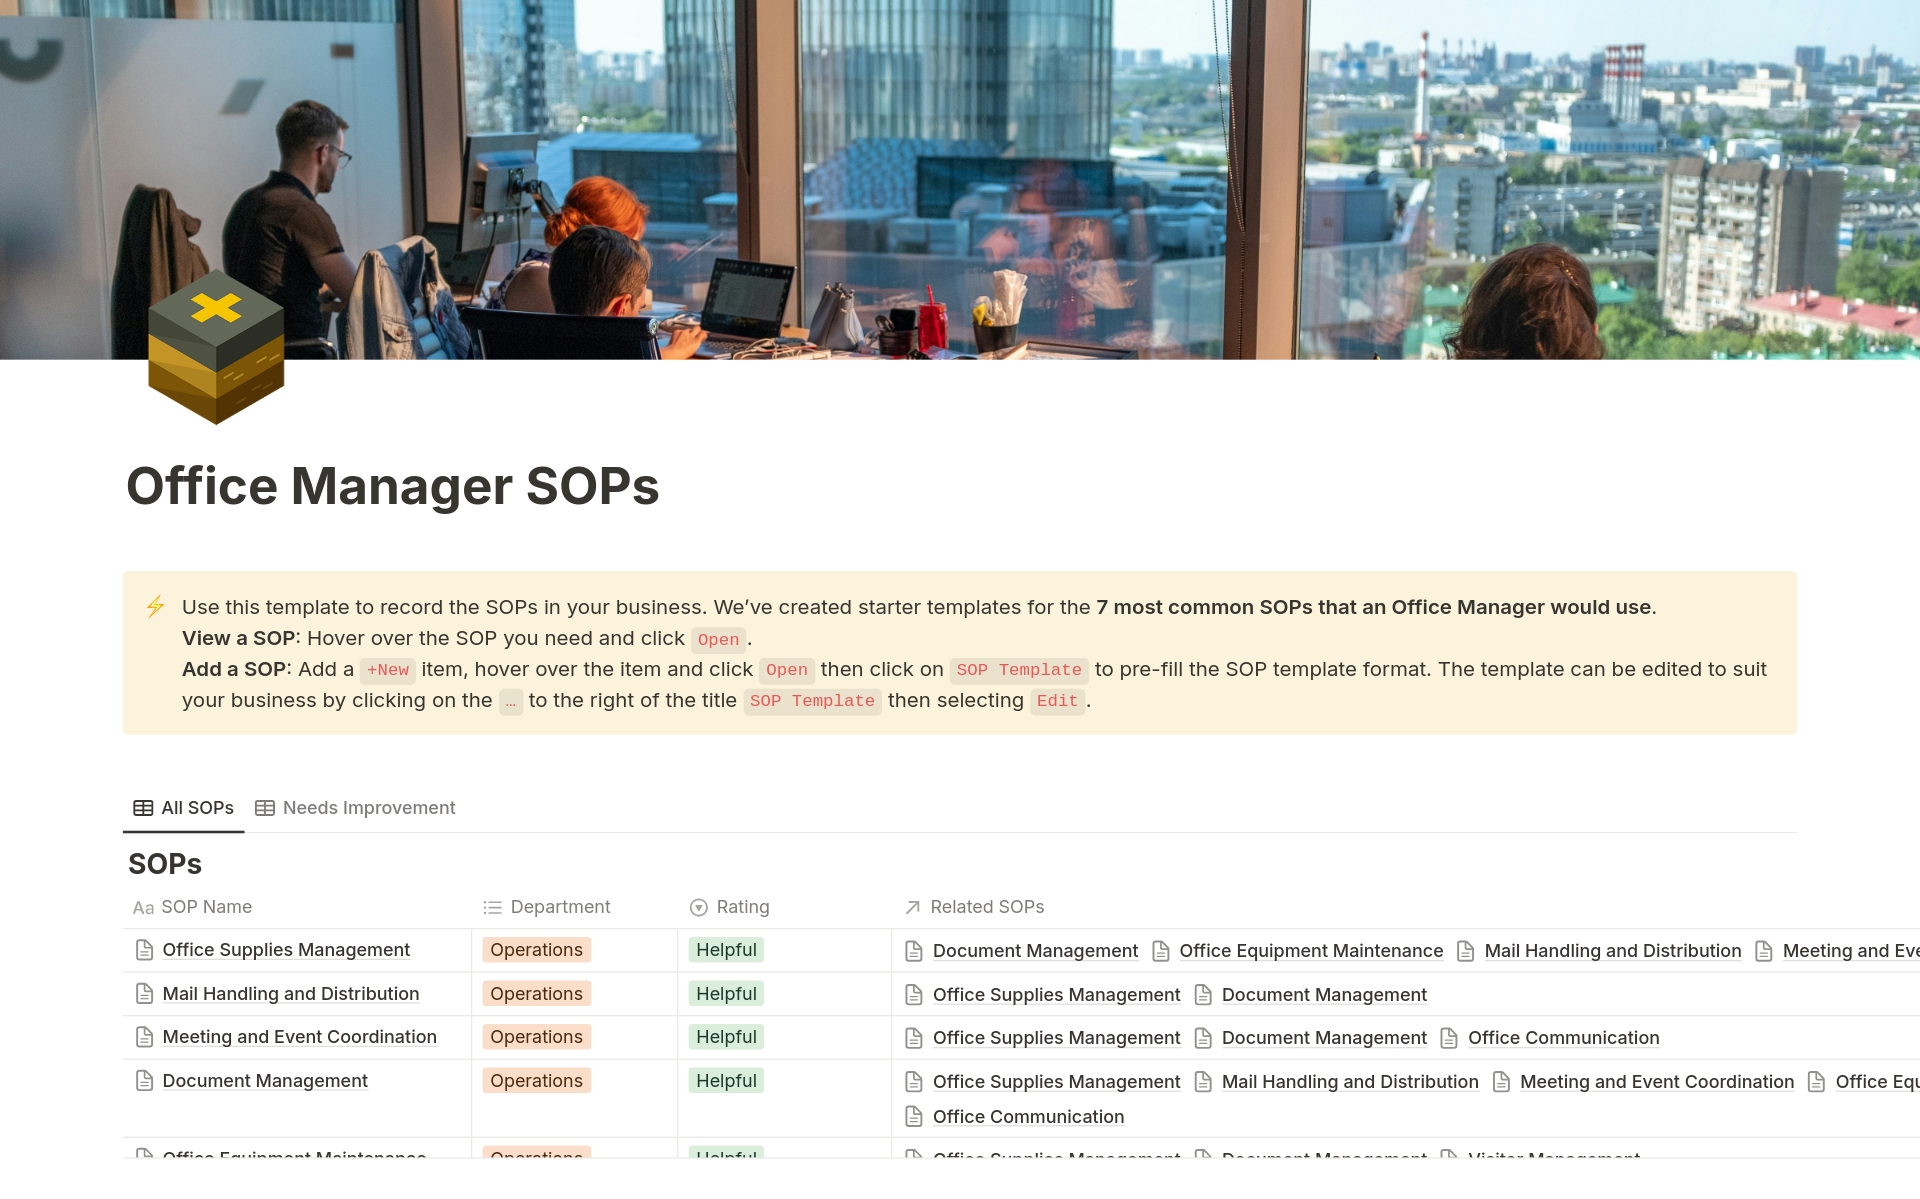 This template contains standard operating procedures (SOPs) for several aspects of office management. Includes 20+ pages of best practice SOPs to save you 10+ hours of research.